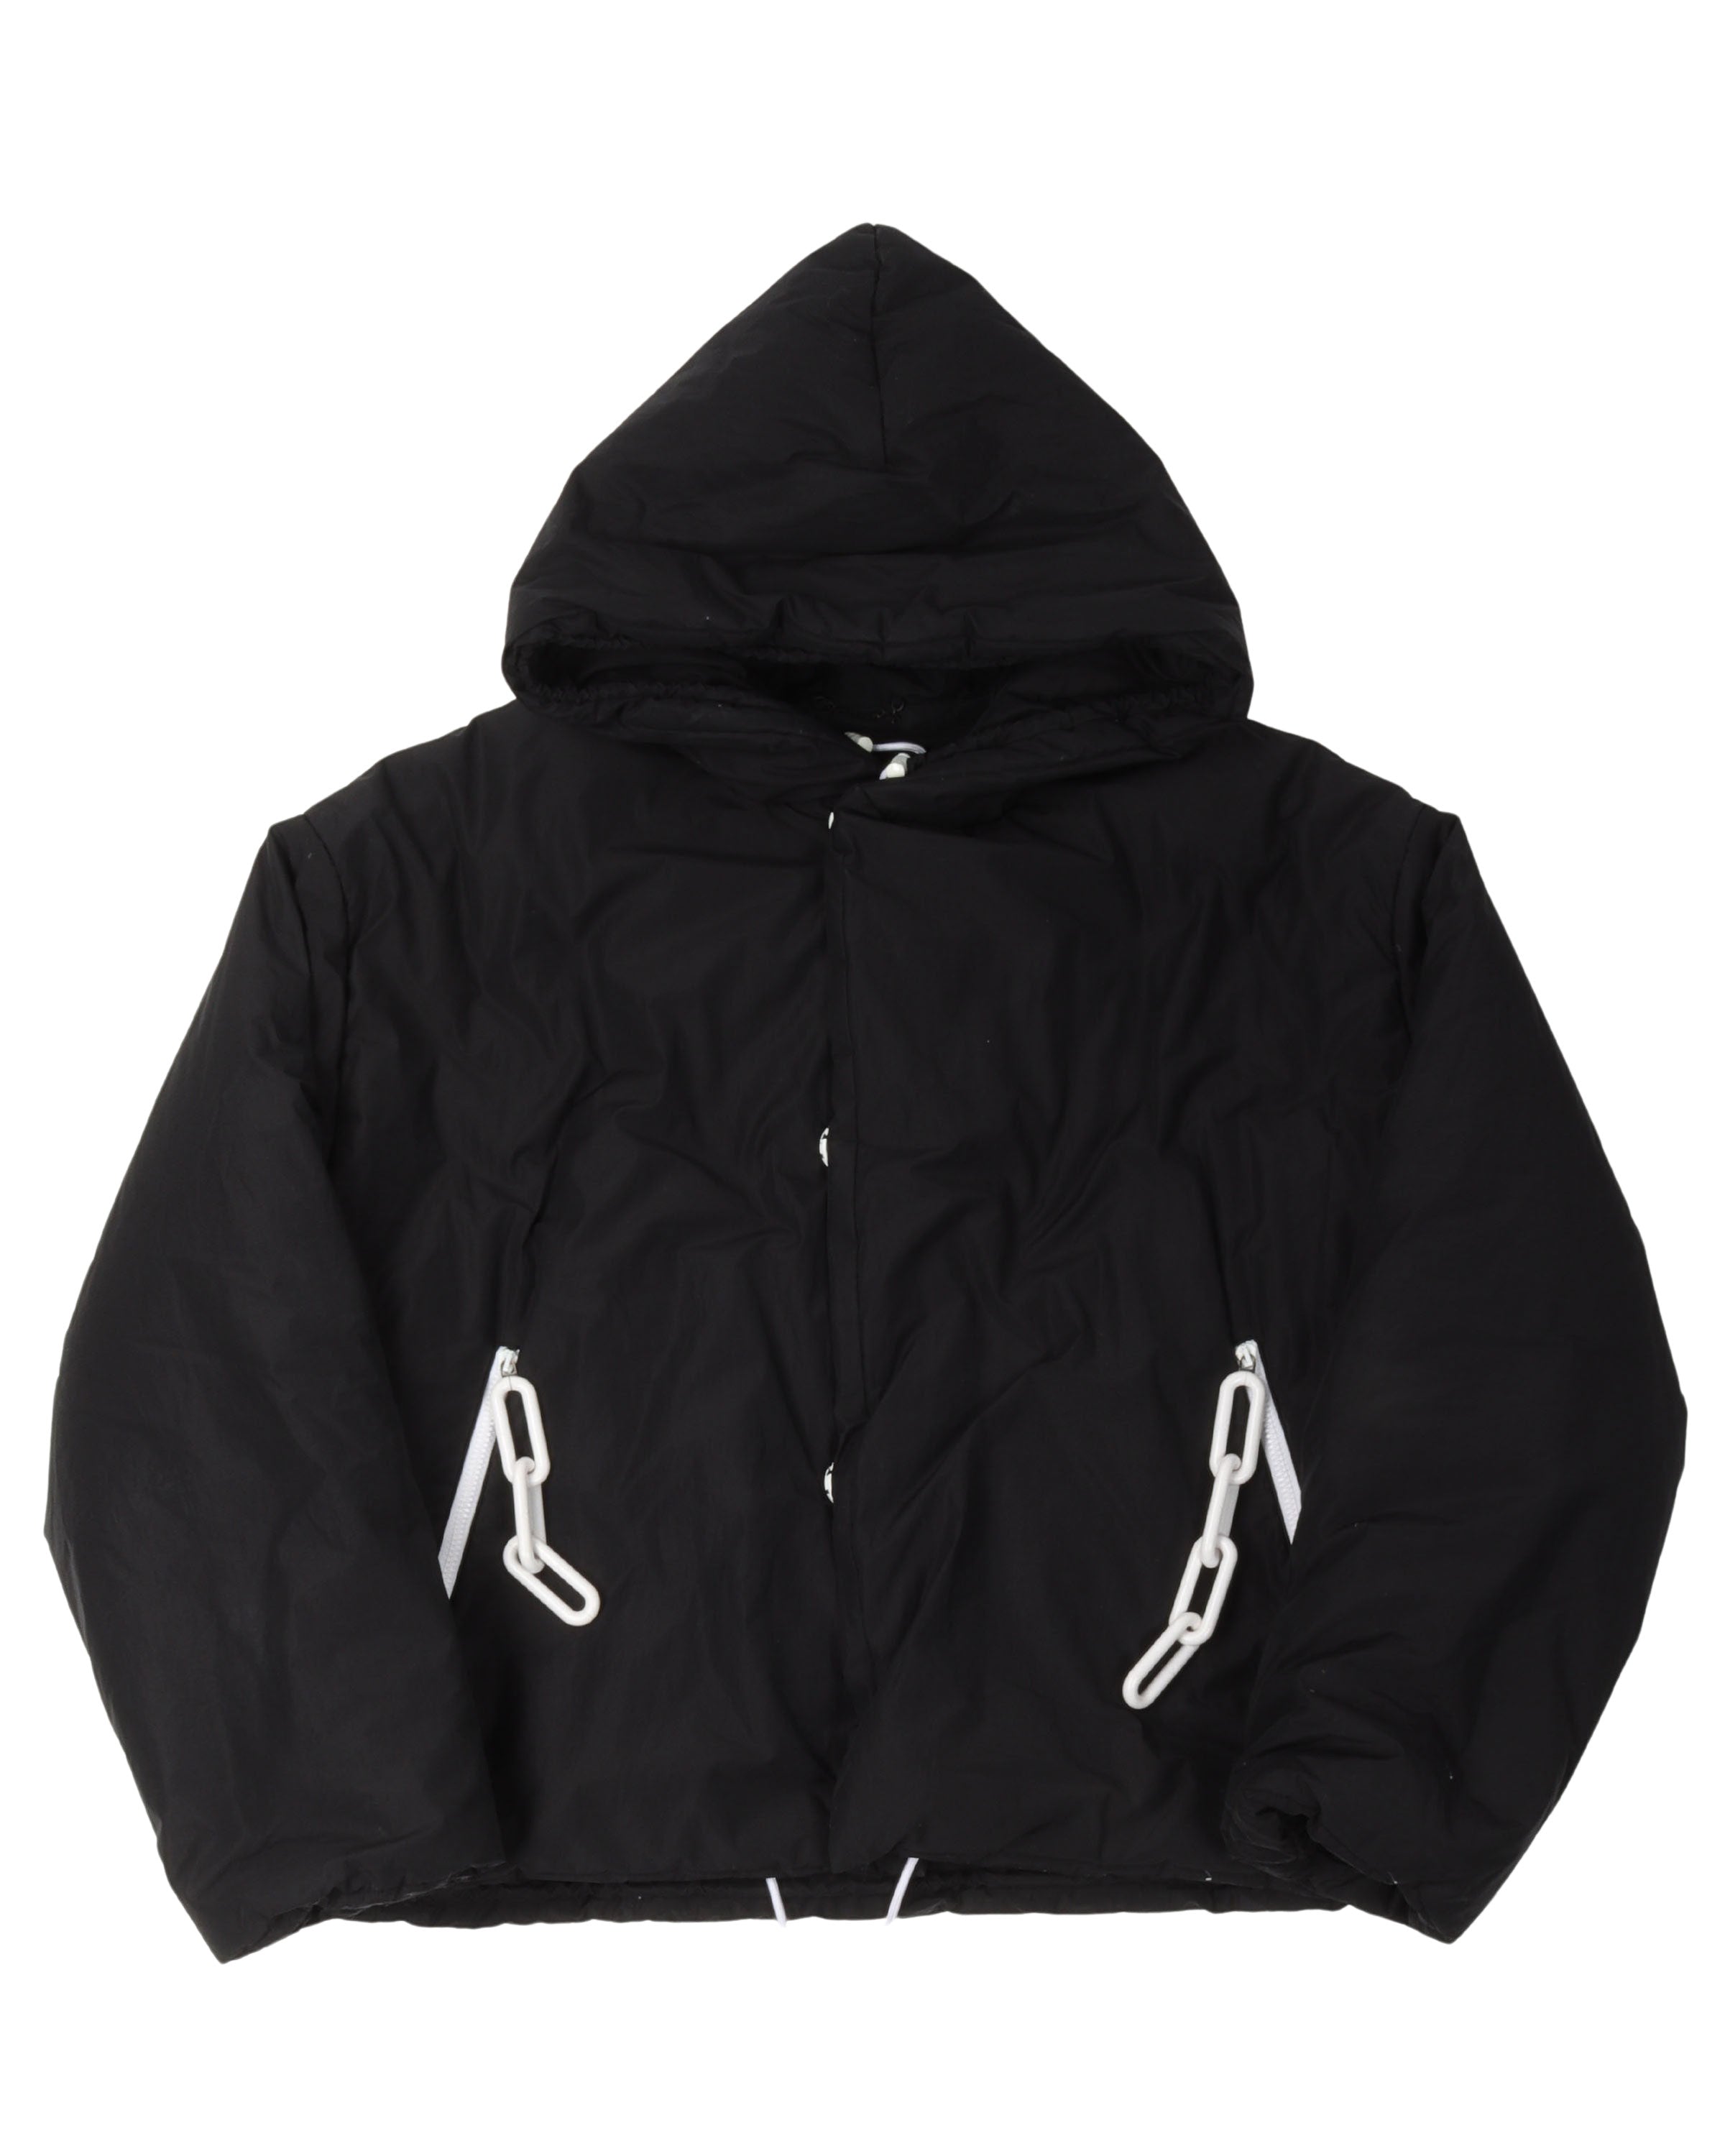 FW19 Earth Padded Chain Detail Hooded Jacket